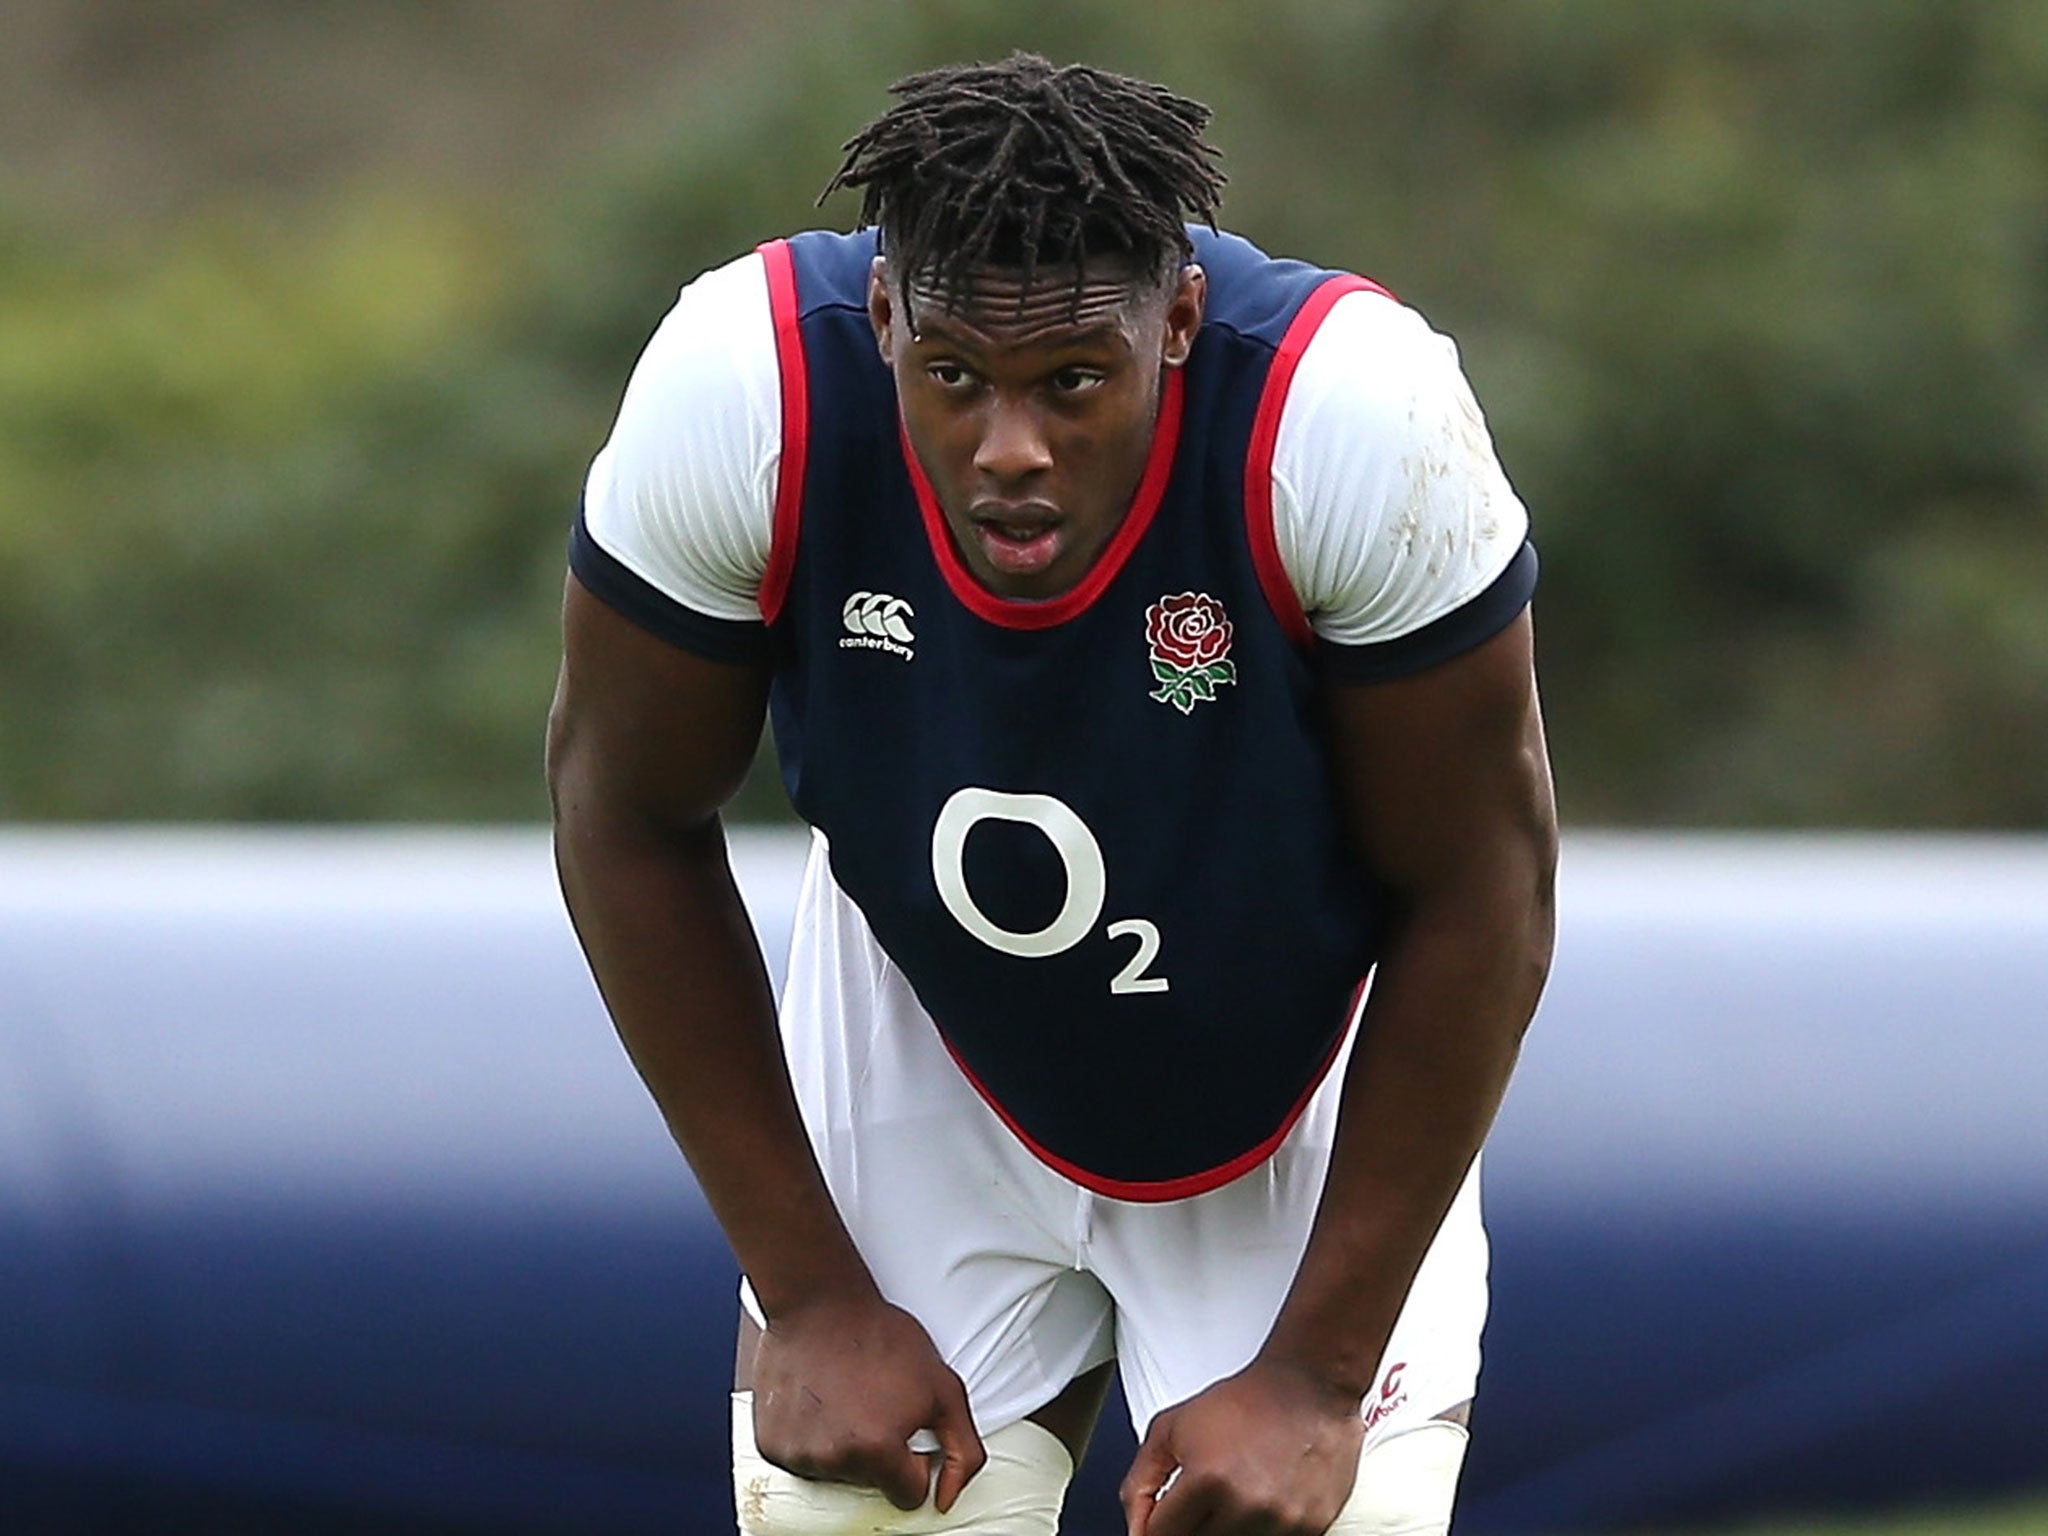 Maro Itoje could make his England debut against Italy